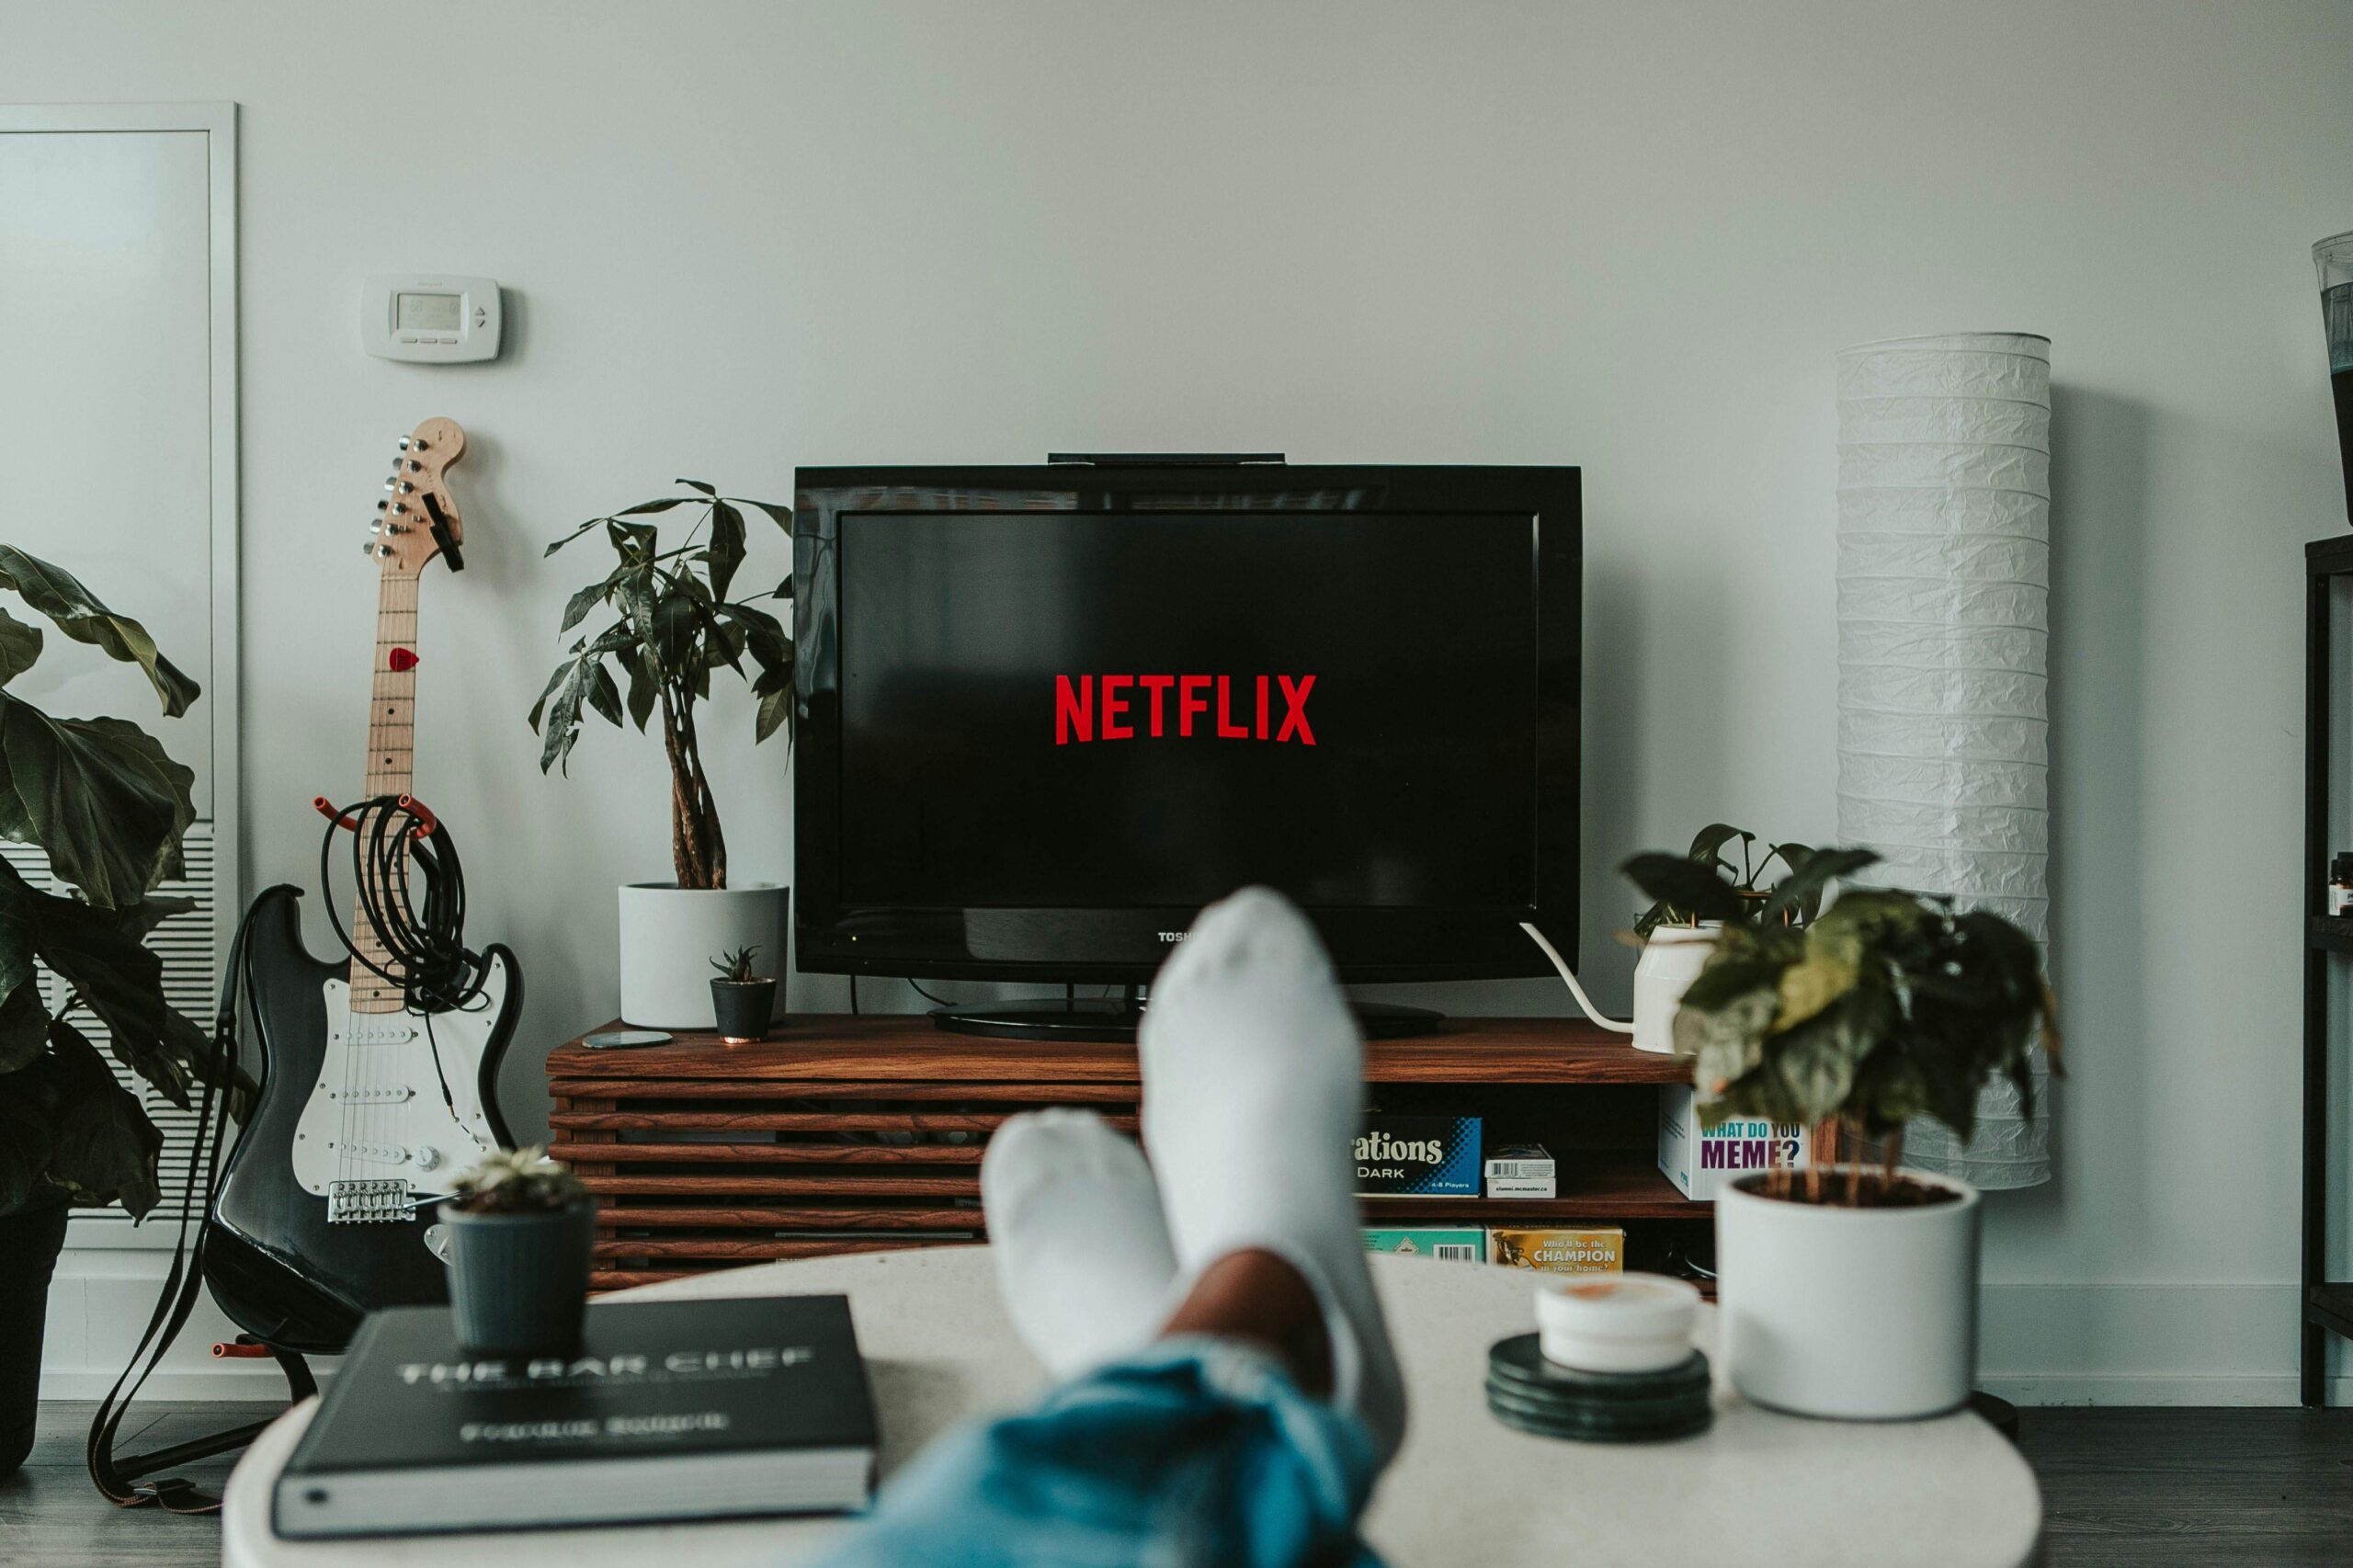 Florida Residents to Soon Have Netflix Tax